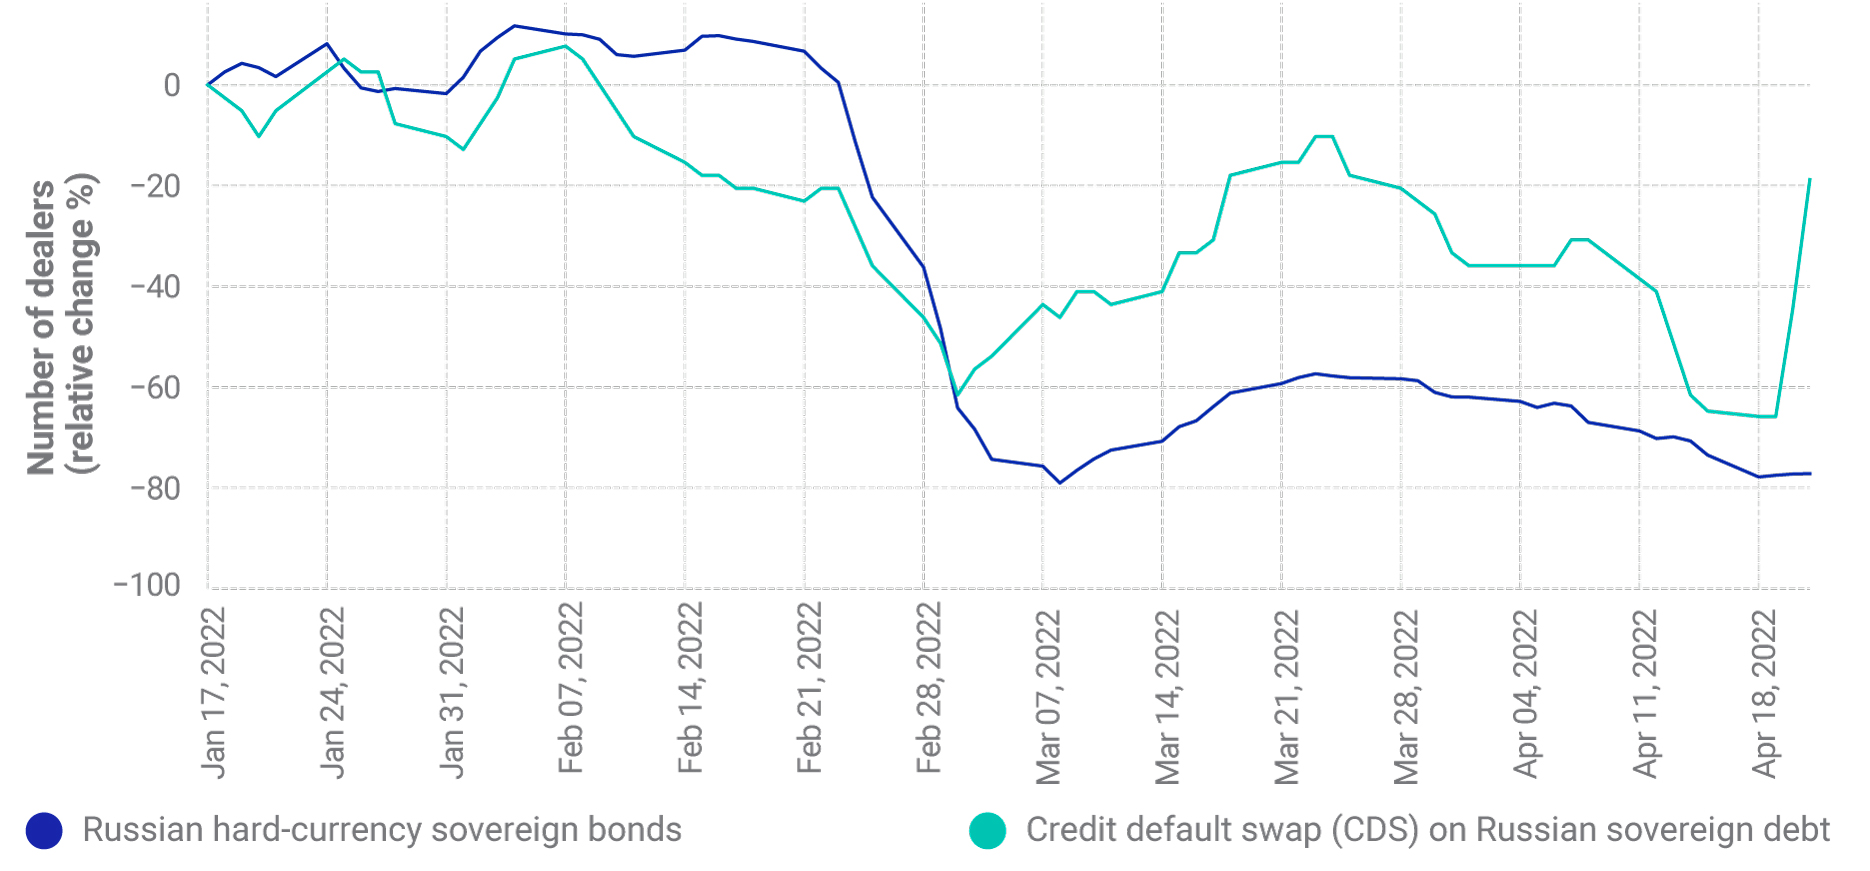 Number of dealers quoting Russian sovereign bonds and CDS dropped